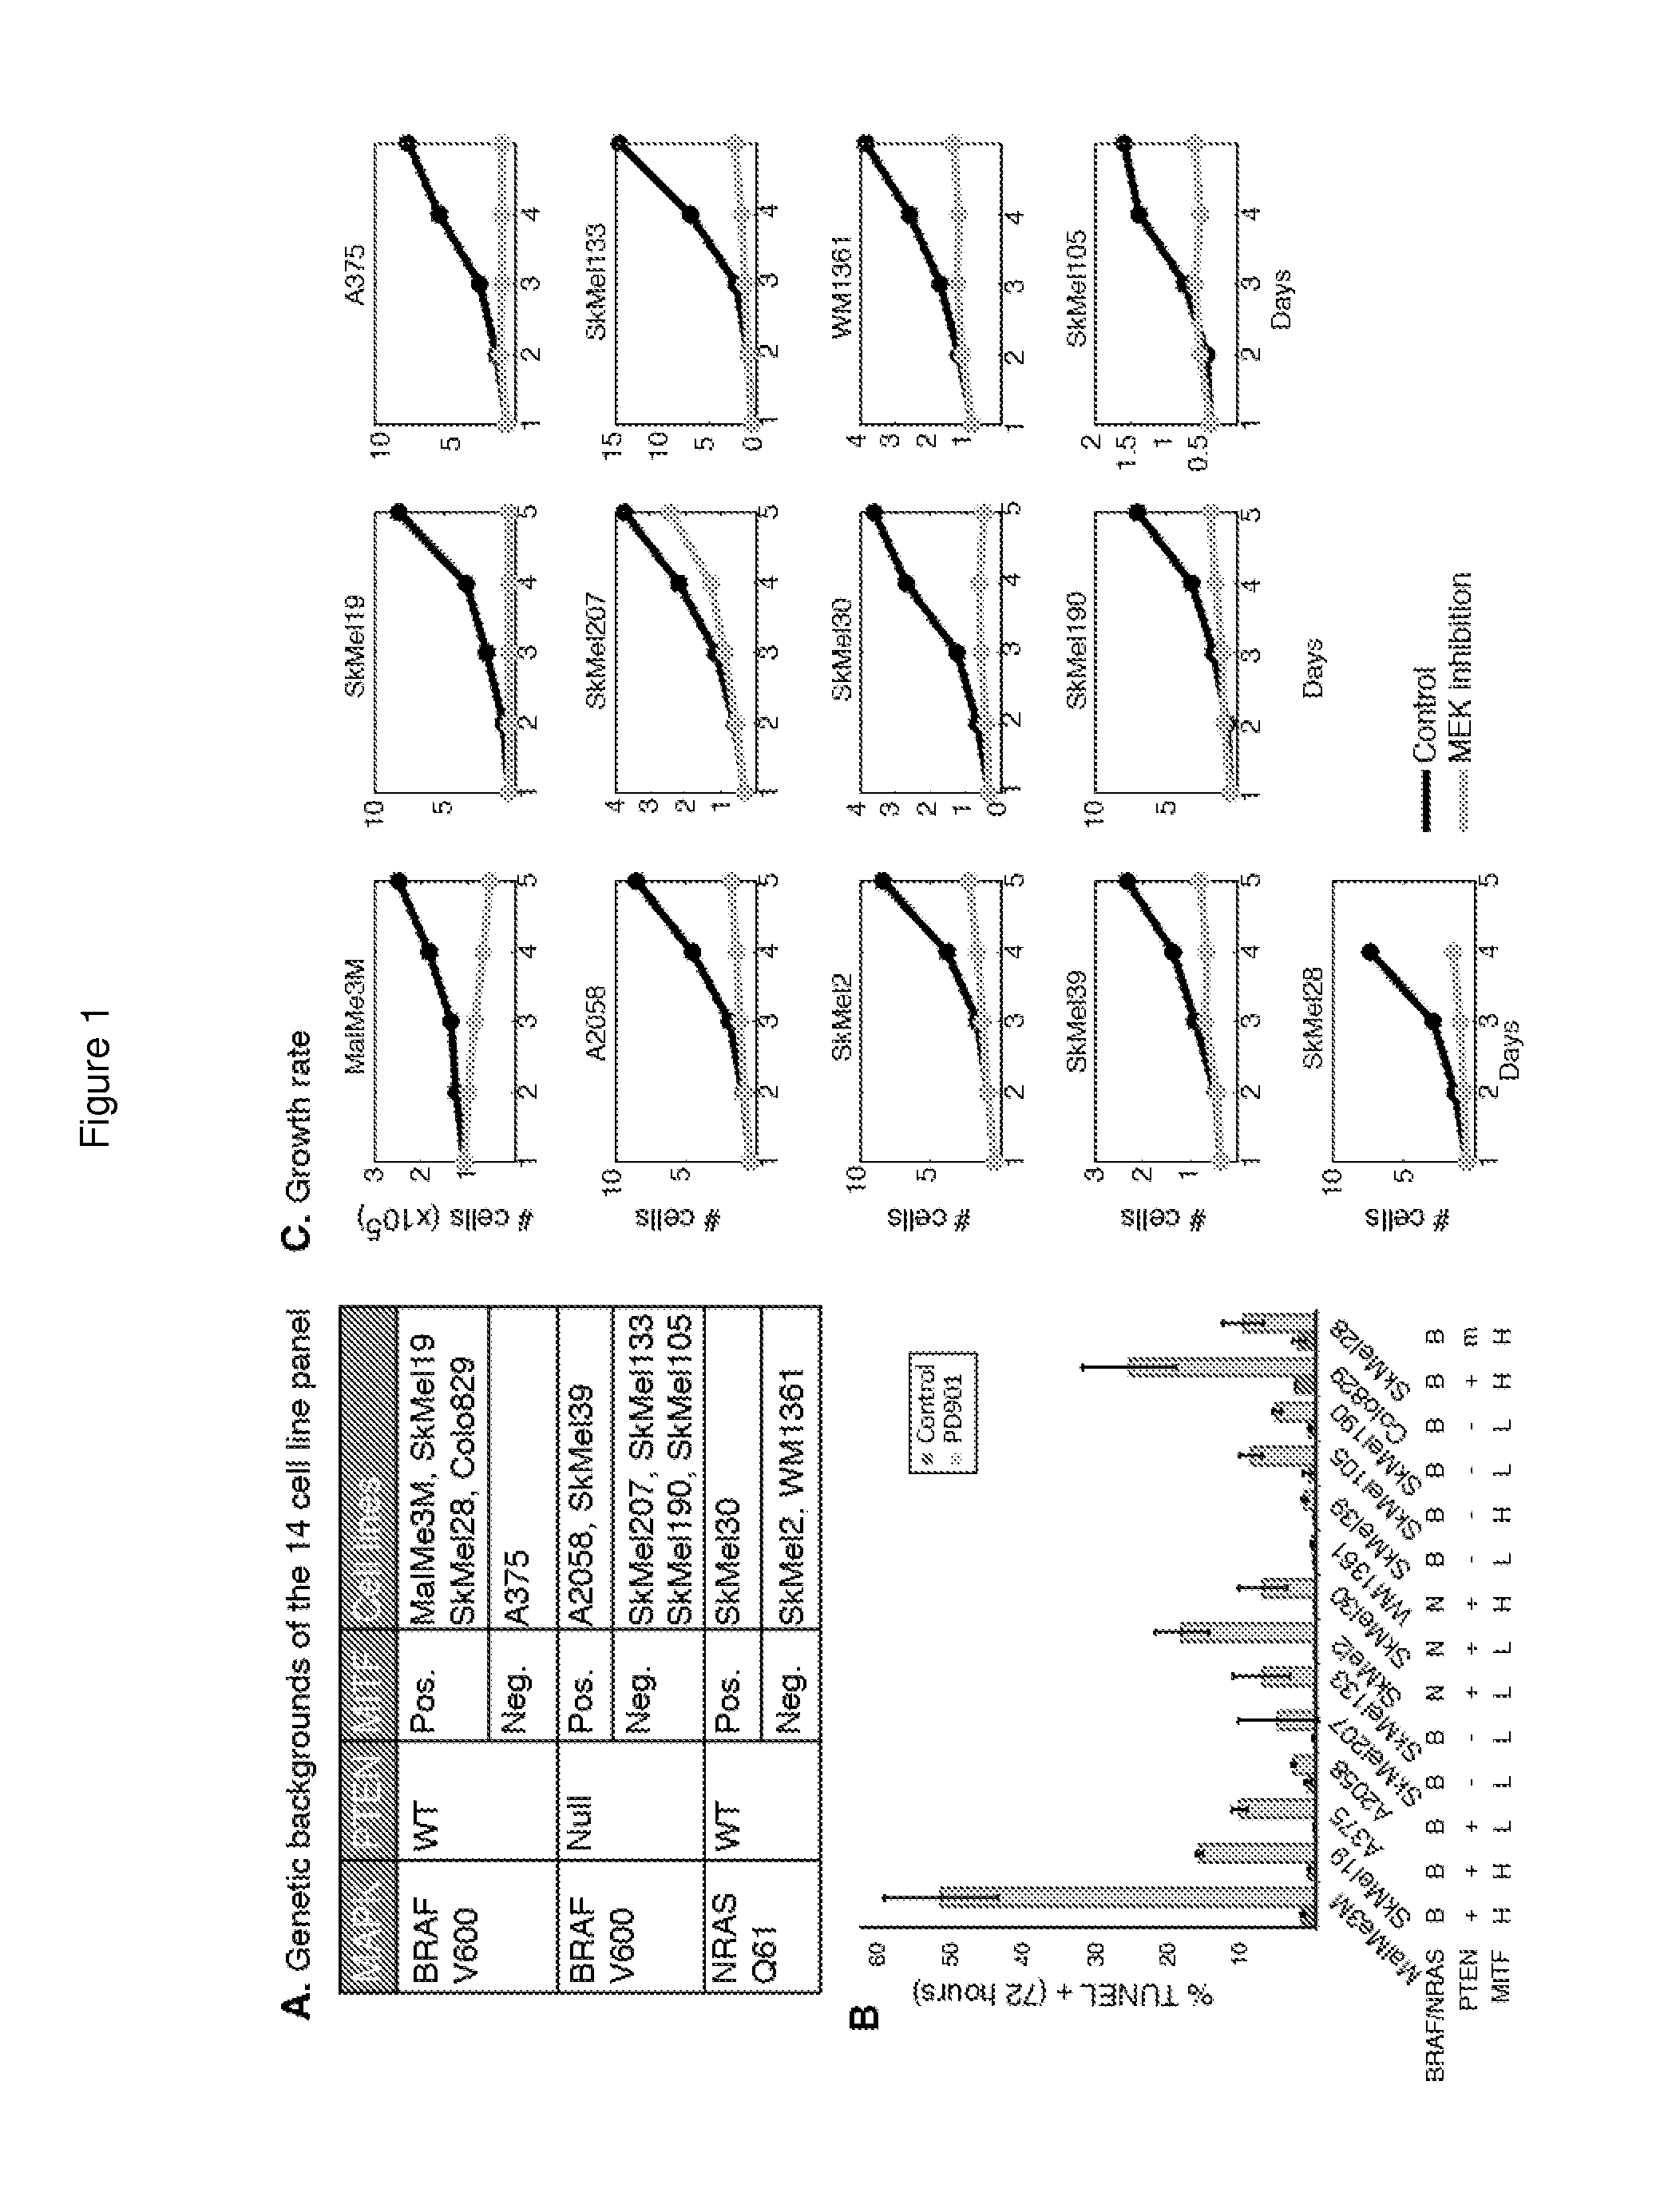 Compositions and methods for treating cancer using interferon and mapk pathway inhibitor